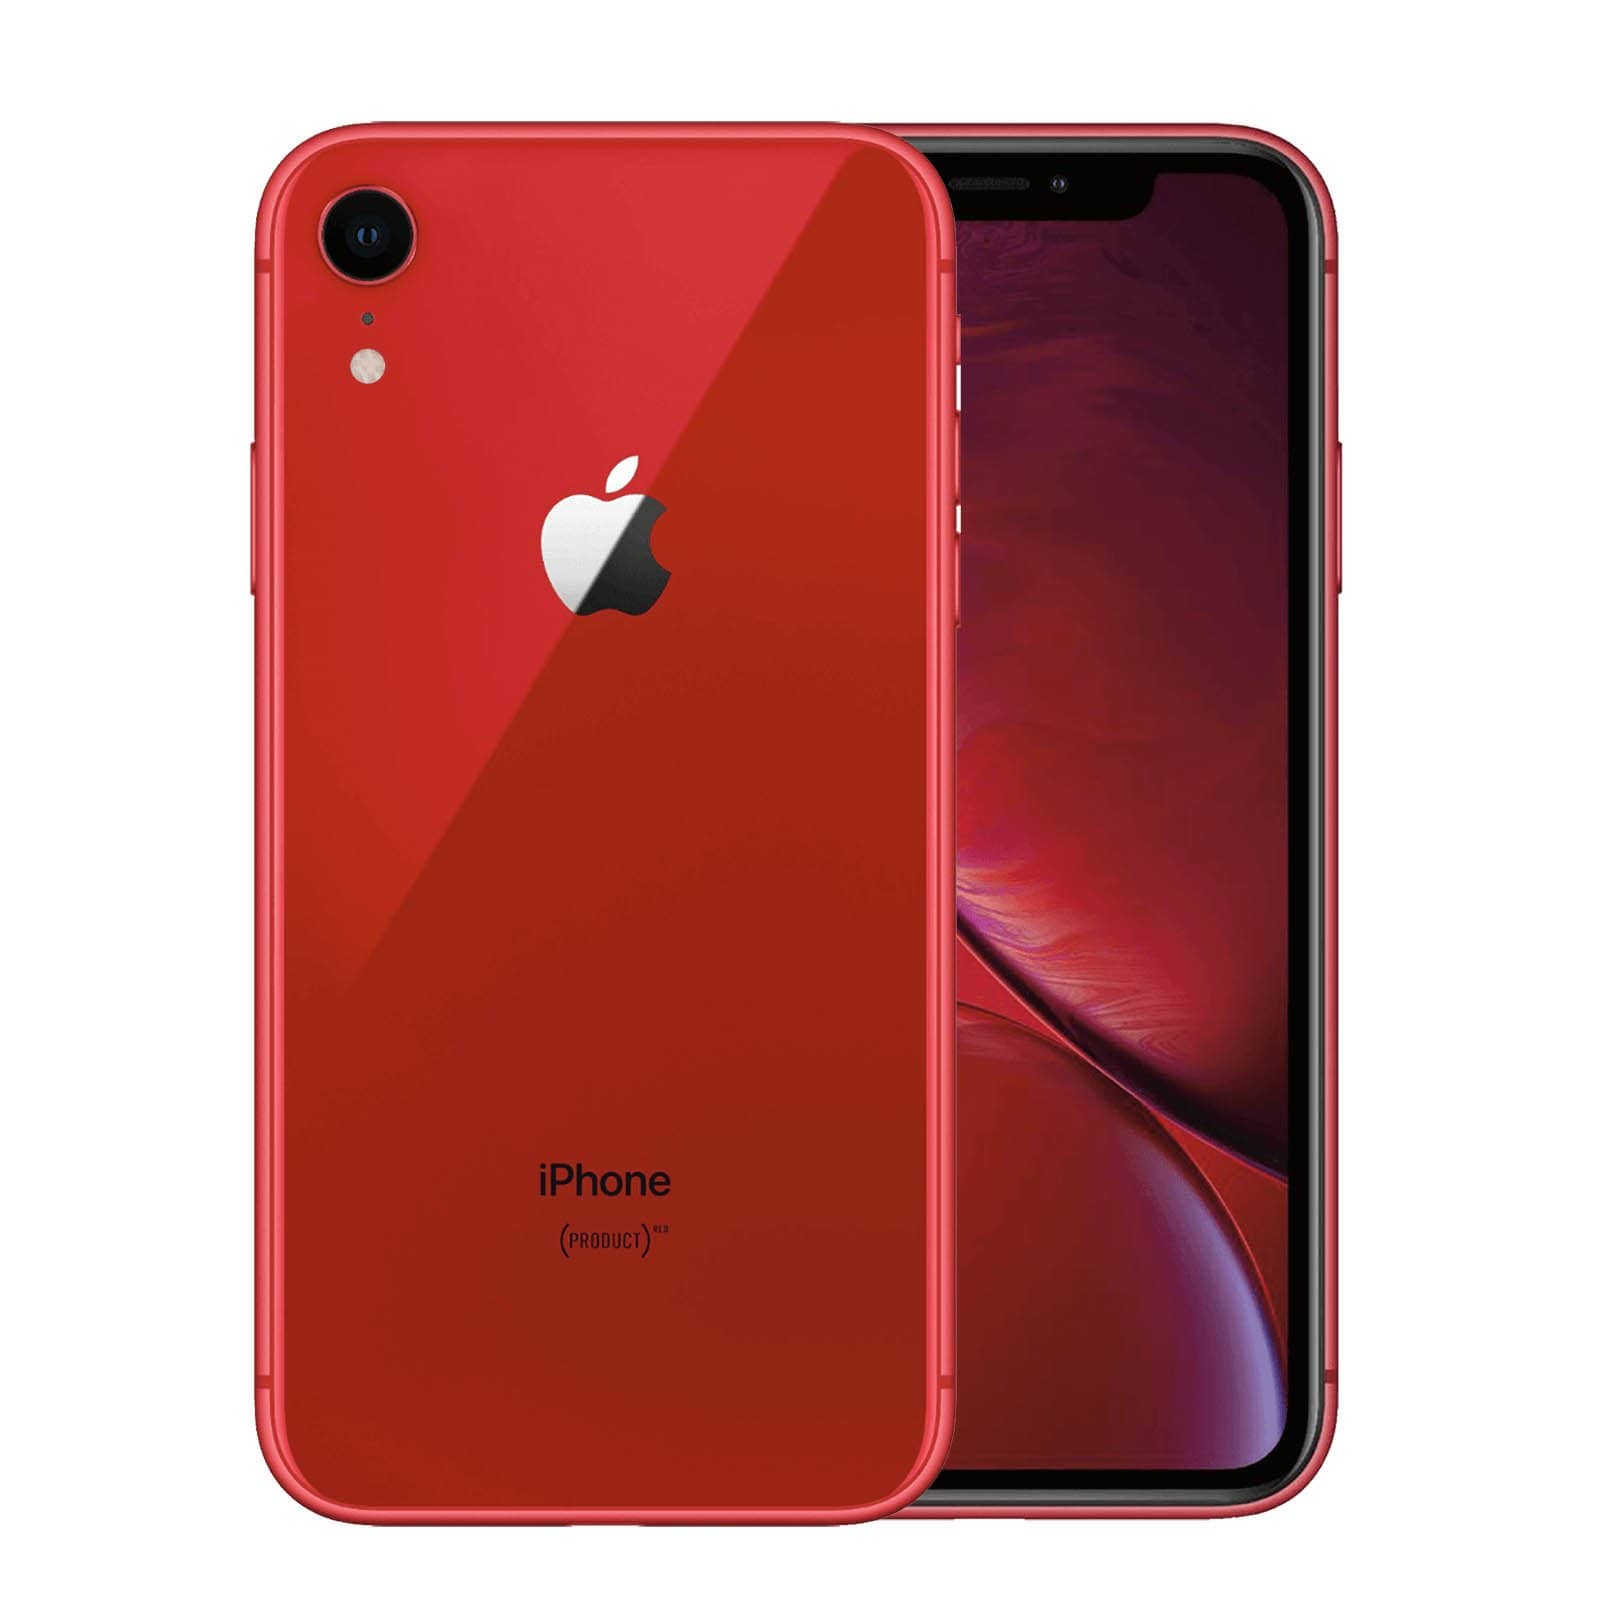 Apple iPhone XR 64GB Product Red Good - Unlocked 64GB Product Red Good